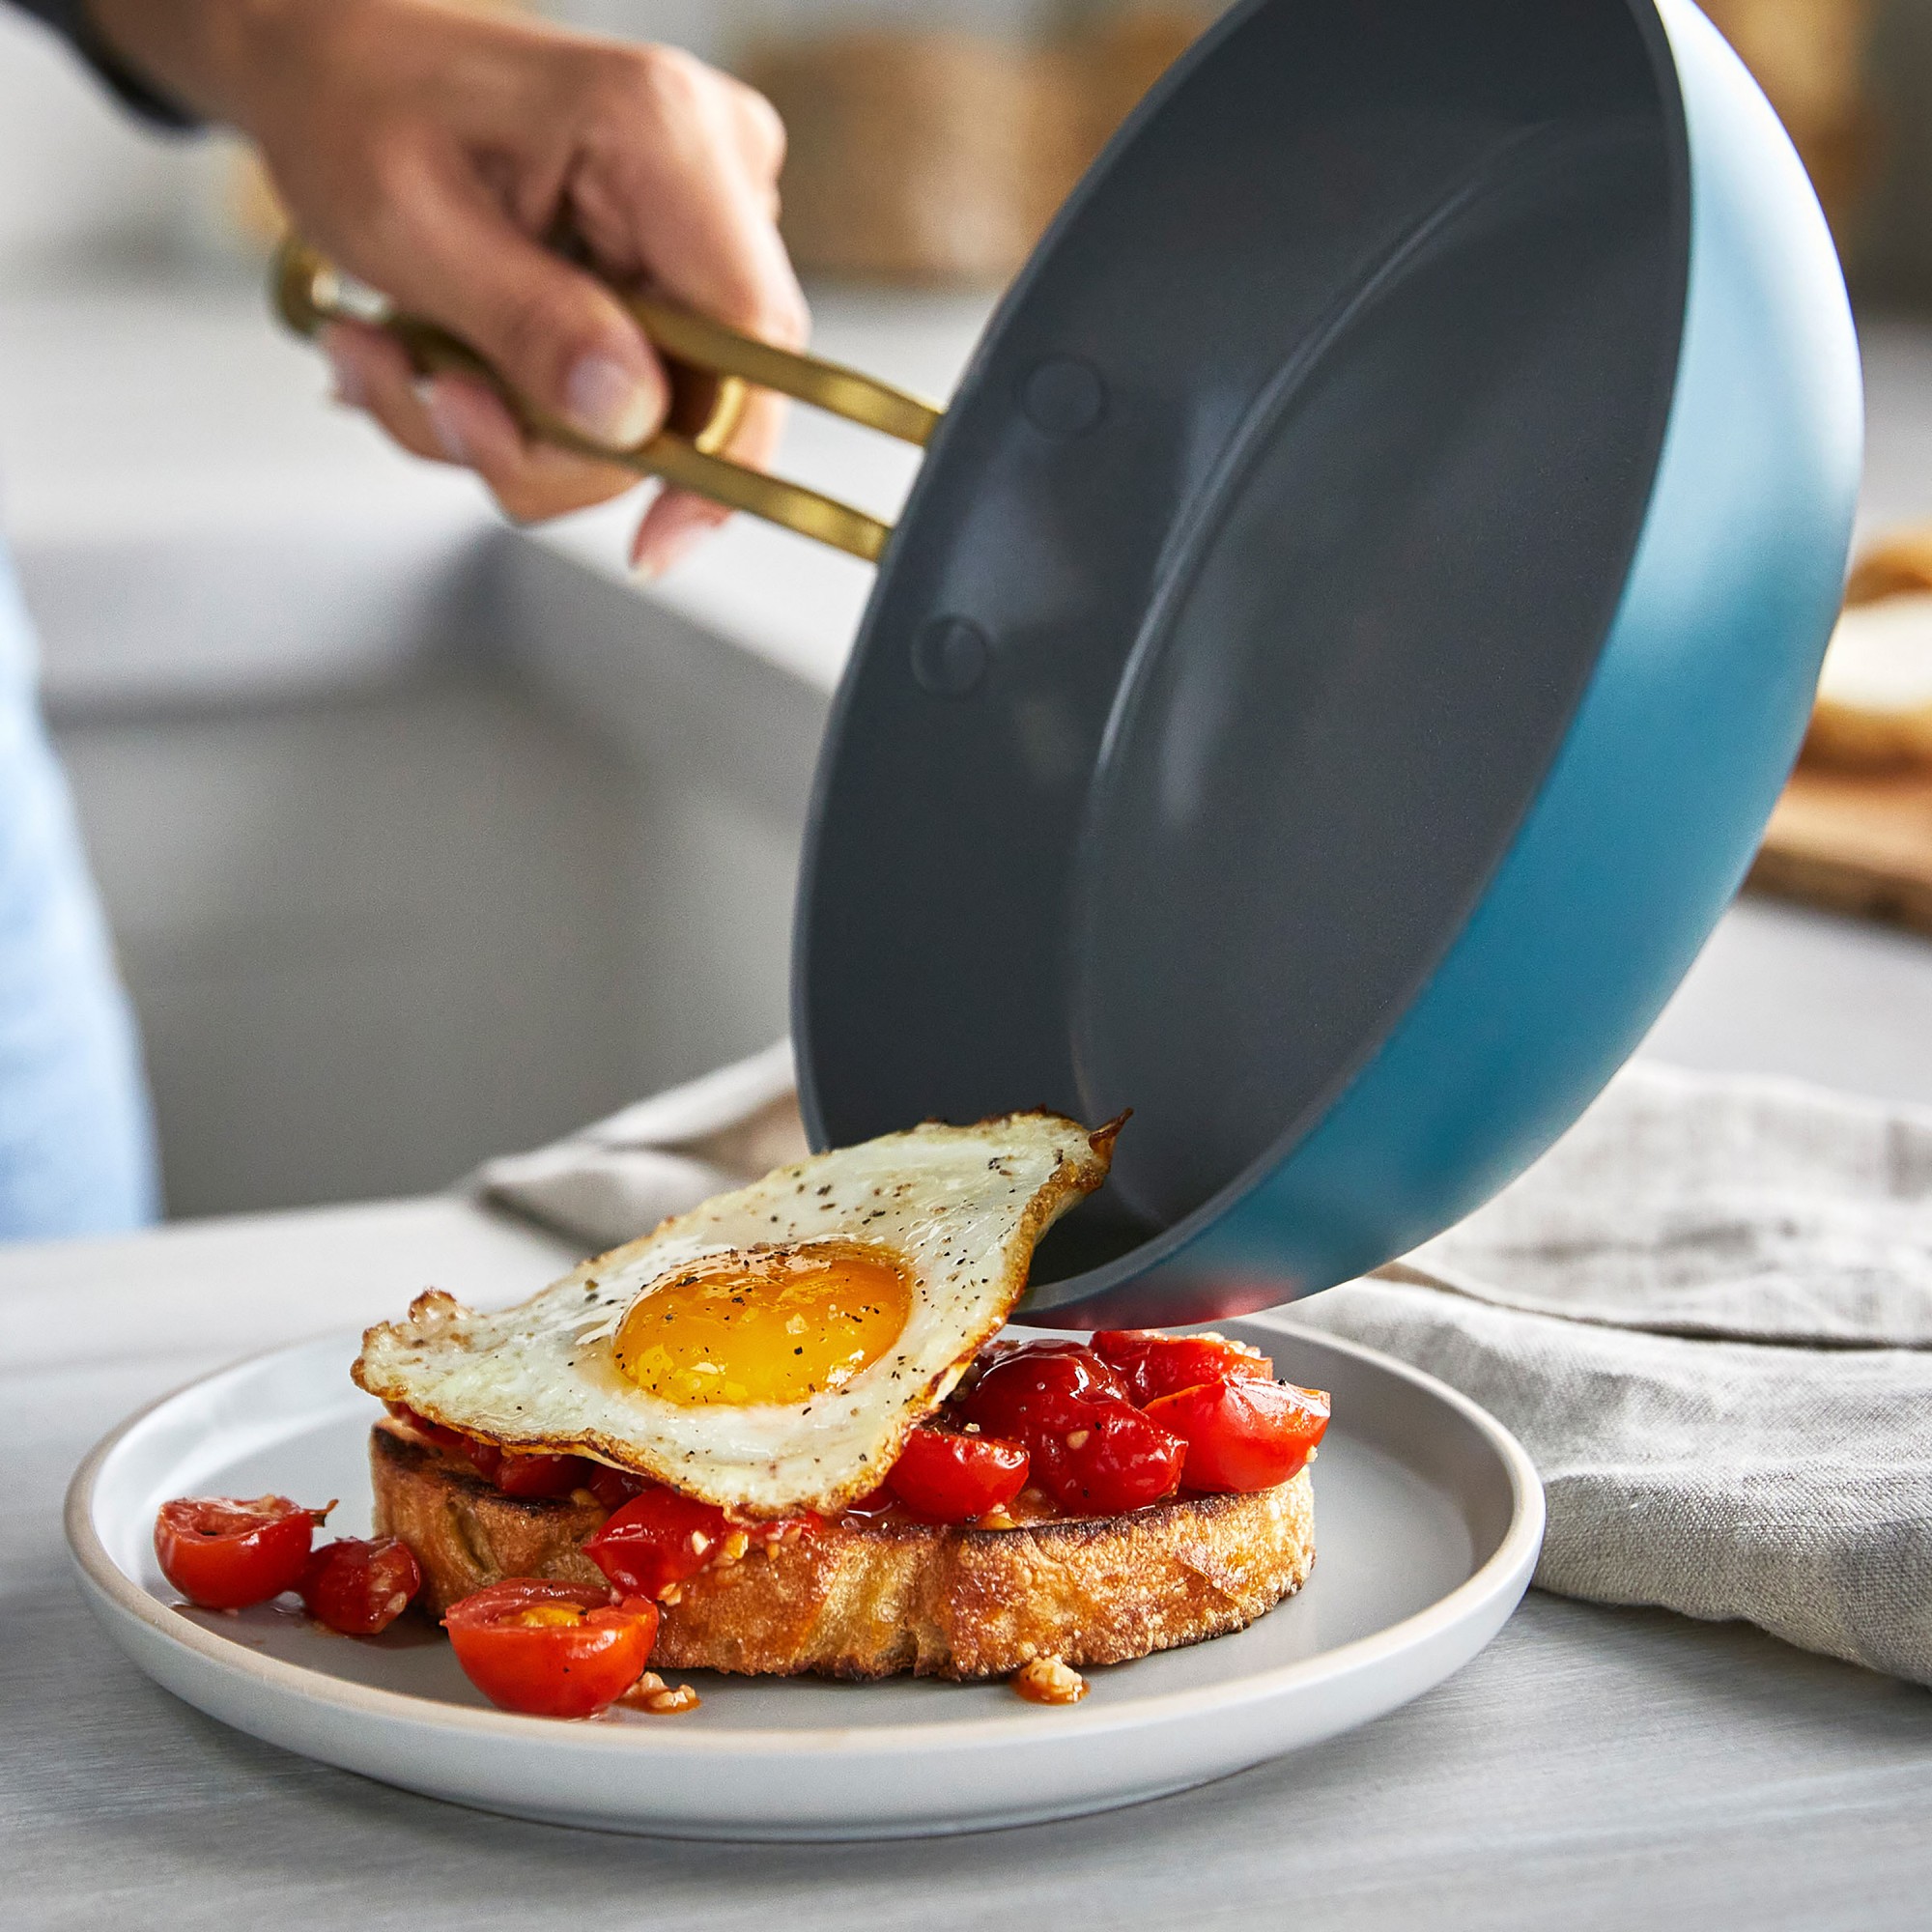 Stanley Tucci launches new cookware at Williams-Sonoma, and it's just as  sophisticated as he is - Good Morning America